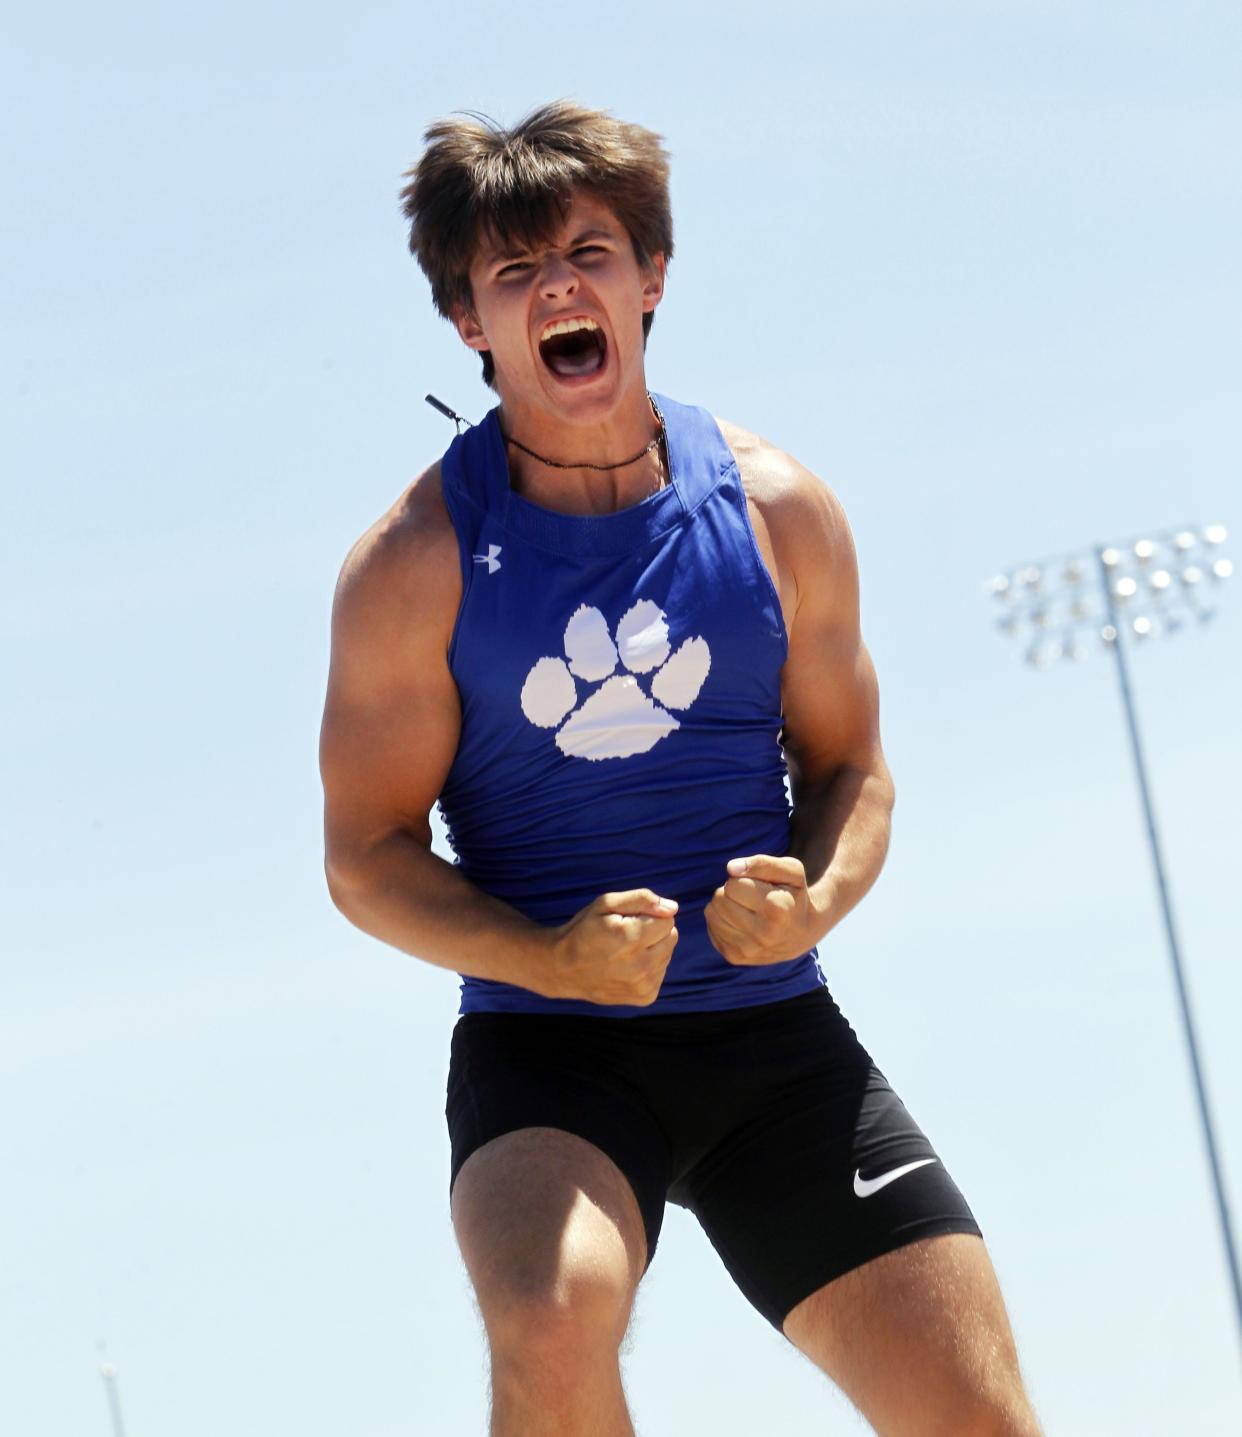 Davidson senior Jack De Francesco won the Division I state championship in the pole vault June 4 at Ohio State by clearing 15 feet, 6 inches. He finished second in 2021 in a program-record 16-6.